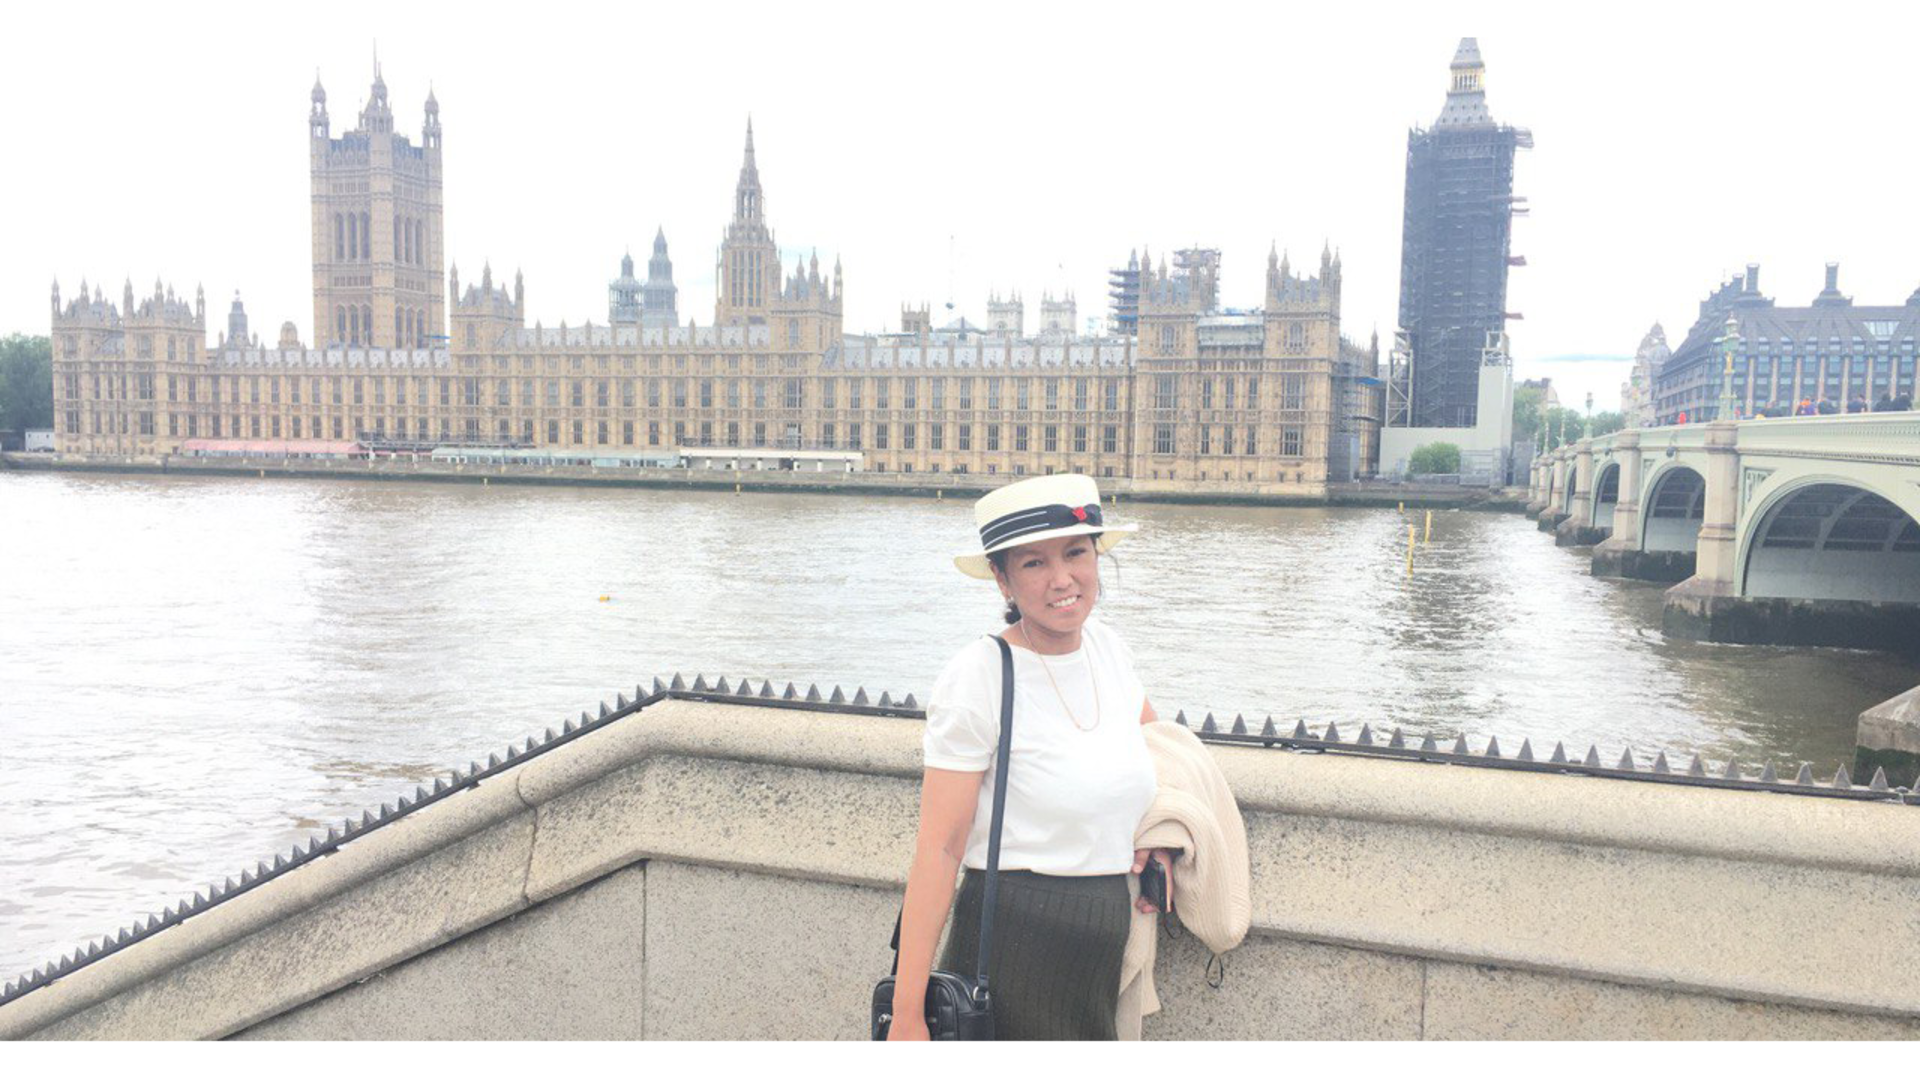 Landscape photo of Gulnaz Tasbolatova taken across the water from the Houses of Parliament